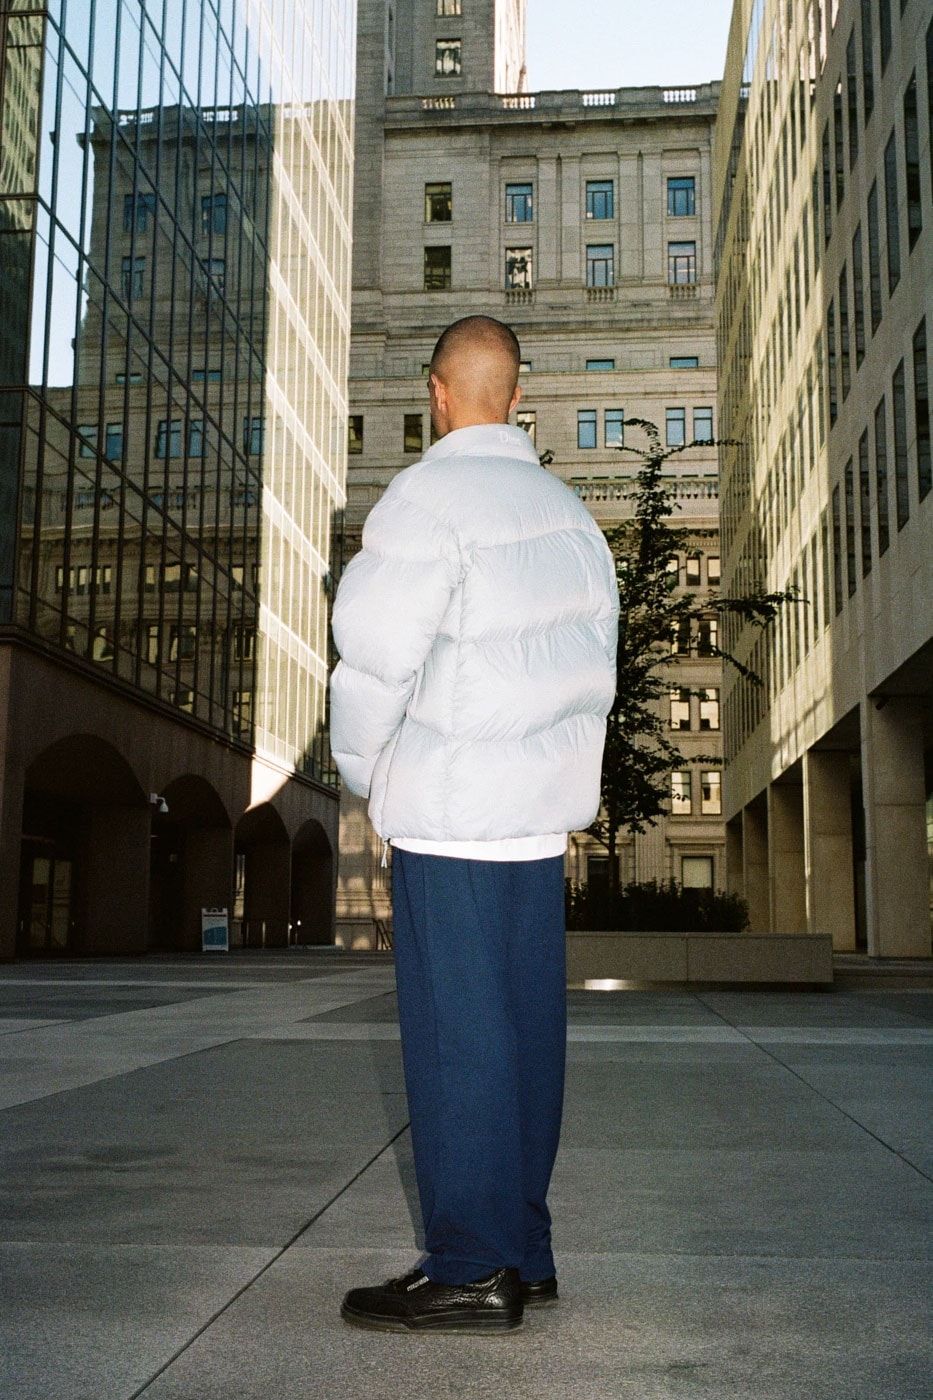 Dime Fall/Winter 2021 Lookbook Release Info Dime Gets Cozy With Its Latest FW21 Drop montreal saint laurent canada streetwear skateboarding fashion